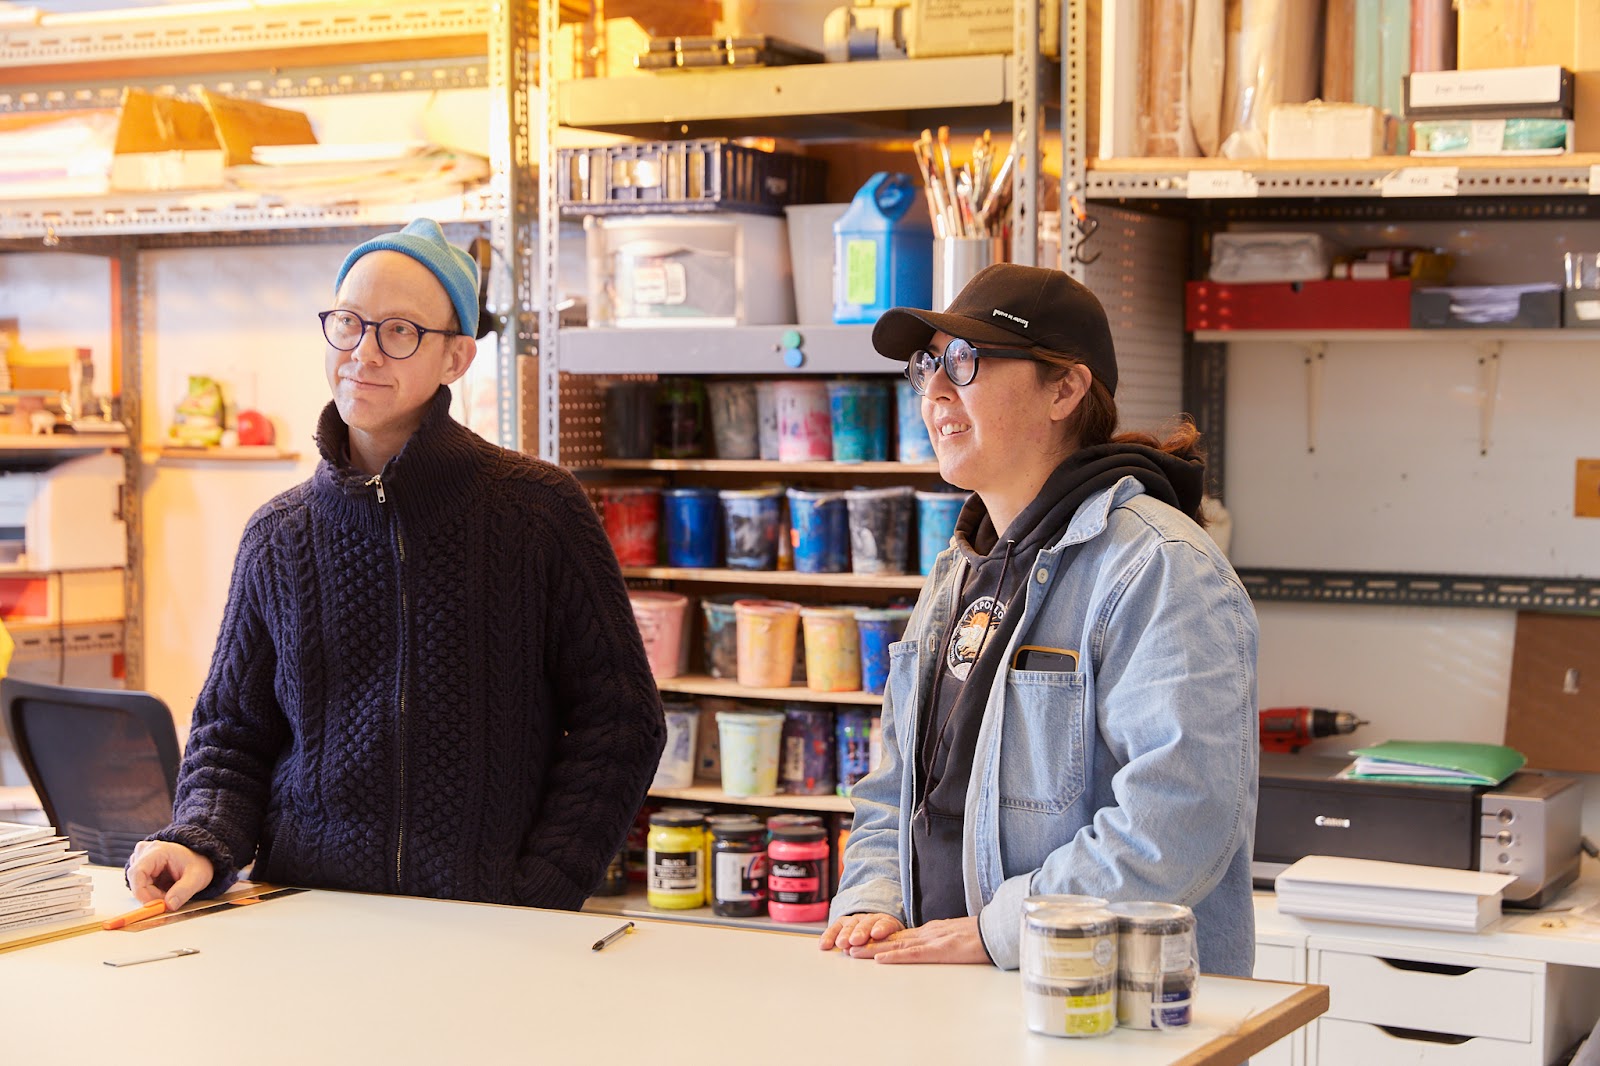 Image: Nick Butcher, left, and Nadine Nakanishi, right, in Sonnenzimmer's studio. They stand at a mostly bare beige table. Behind them are metal racks with multi-colored pint tubs of ink and other tools. To the right, a printer with a green folder on it and a drill. Photo by Sarah Joyce.